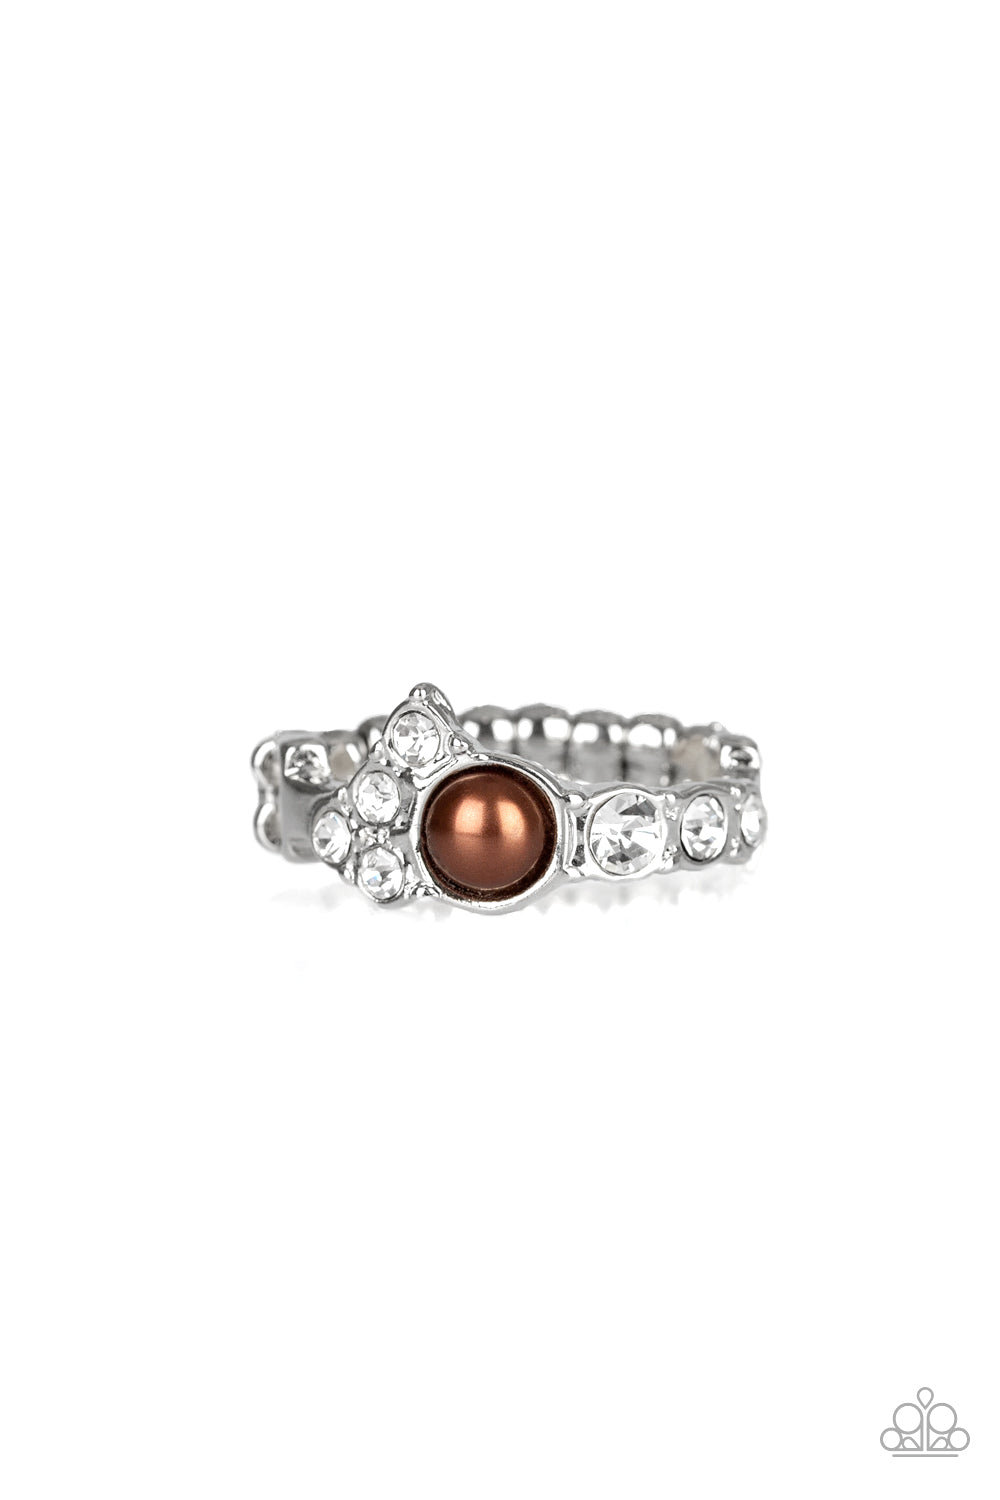 Center Stage Celebrity - Brown Paparazzi Ring